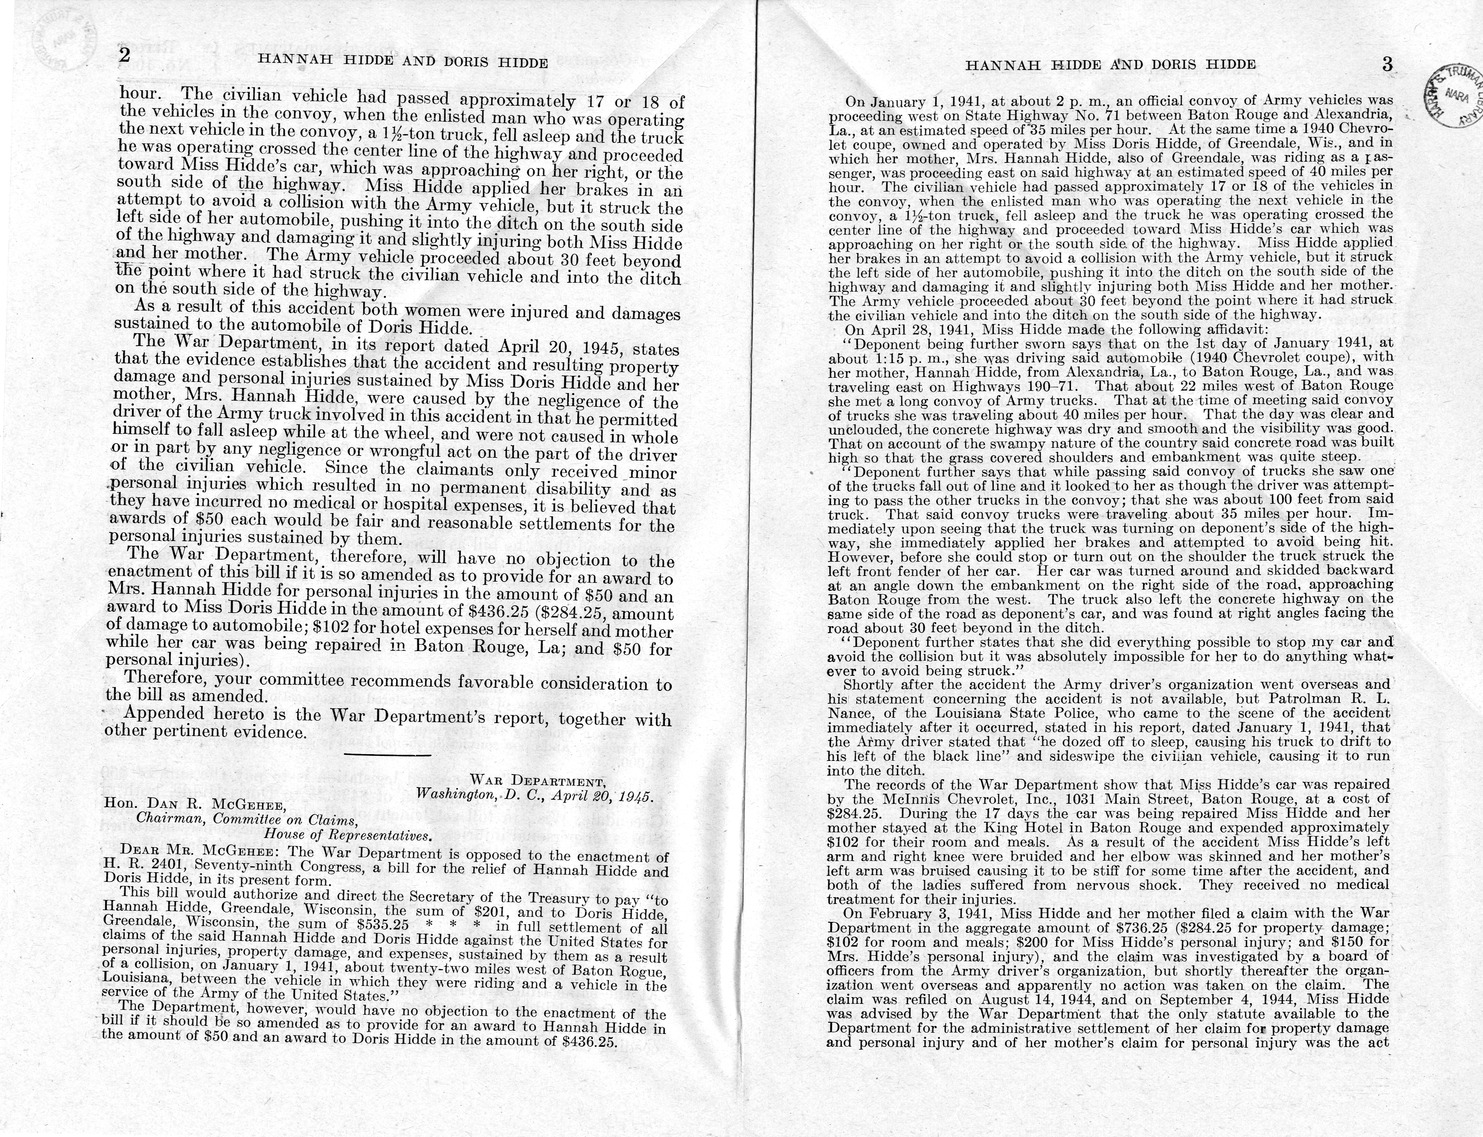 Memorandum from Frederick J. Bailey to M. C. Latta, H.R. 2401, For the Relief of Hannah Hidde and Doris Hidde, with Attachments